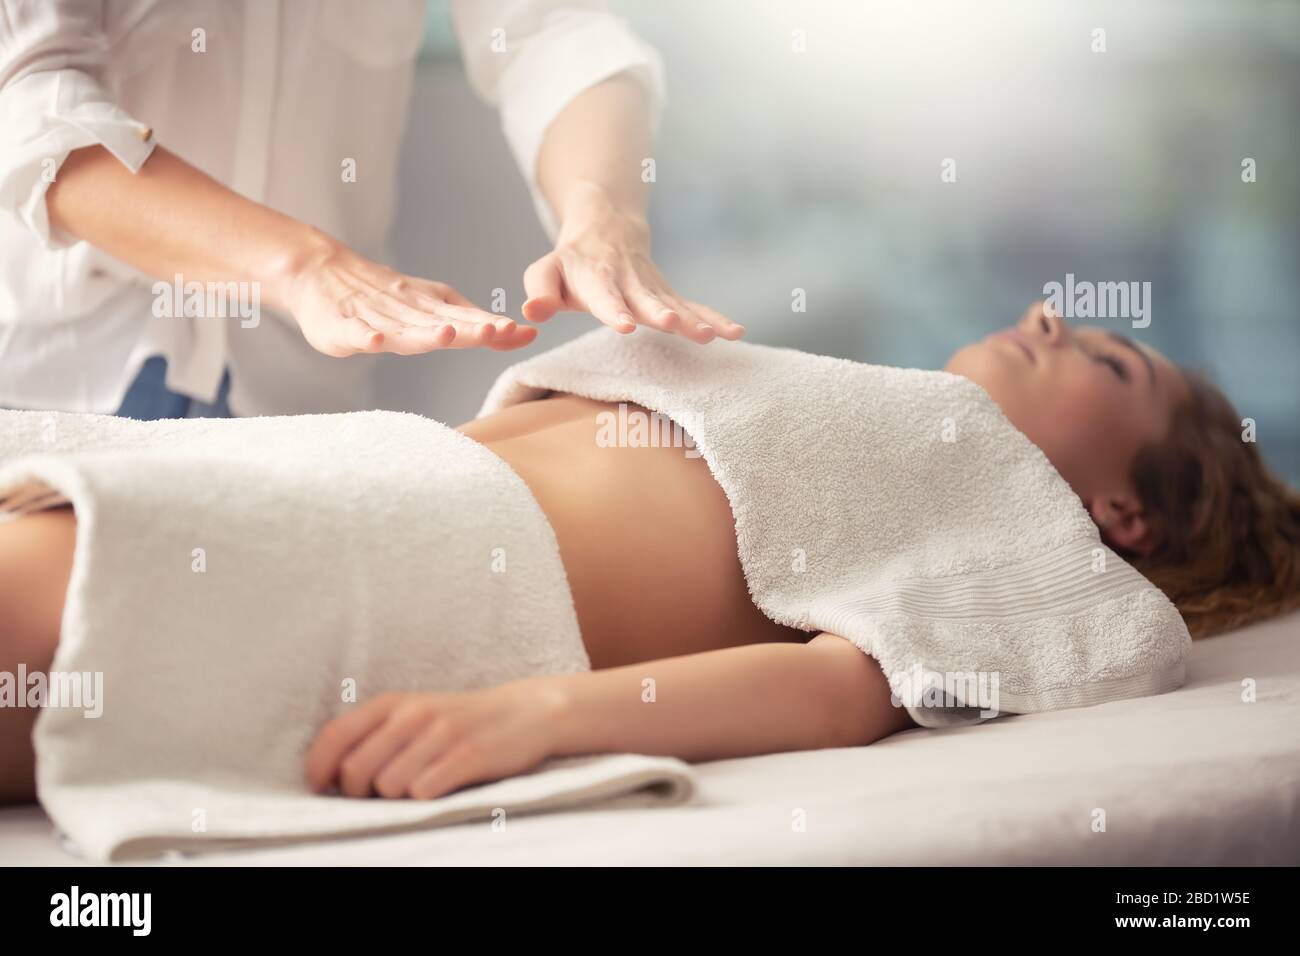 Young girl lying covered with towels over her chest and waist receiving reiki energy through the hands of a therapist. Stock Photo